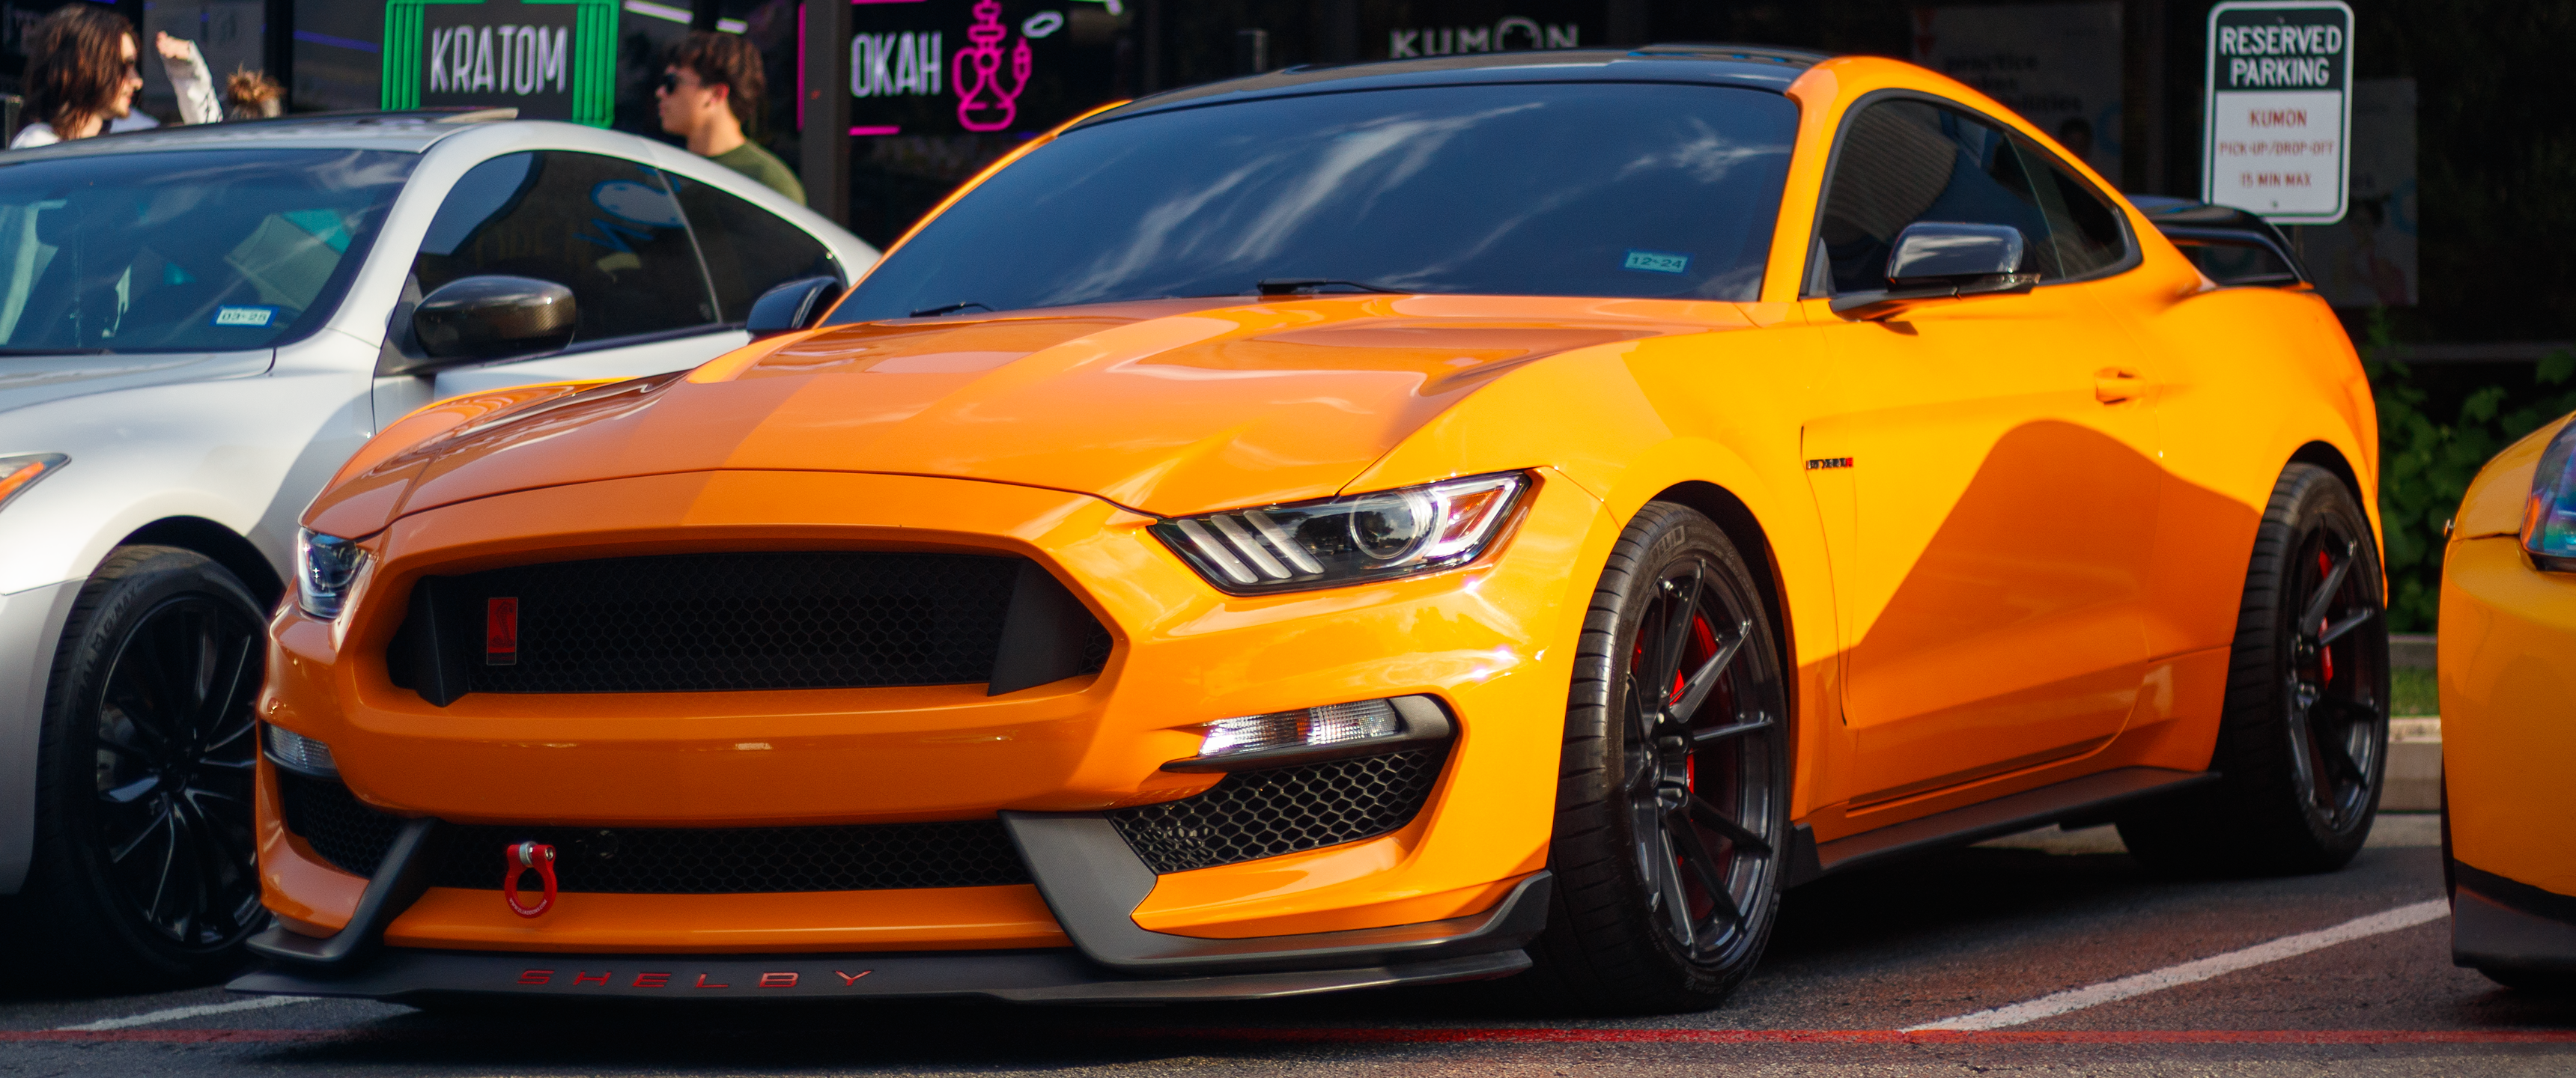 Ford Mustang Mustang Shelby Gt350 Car 3440x1440